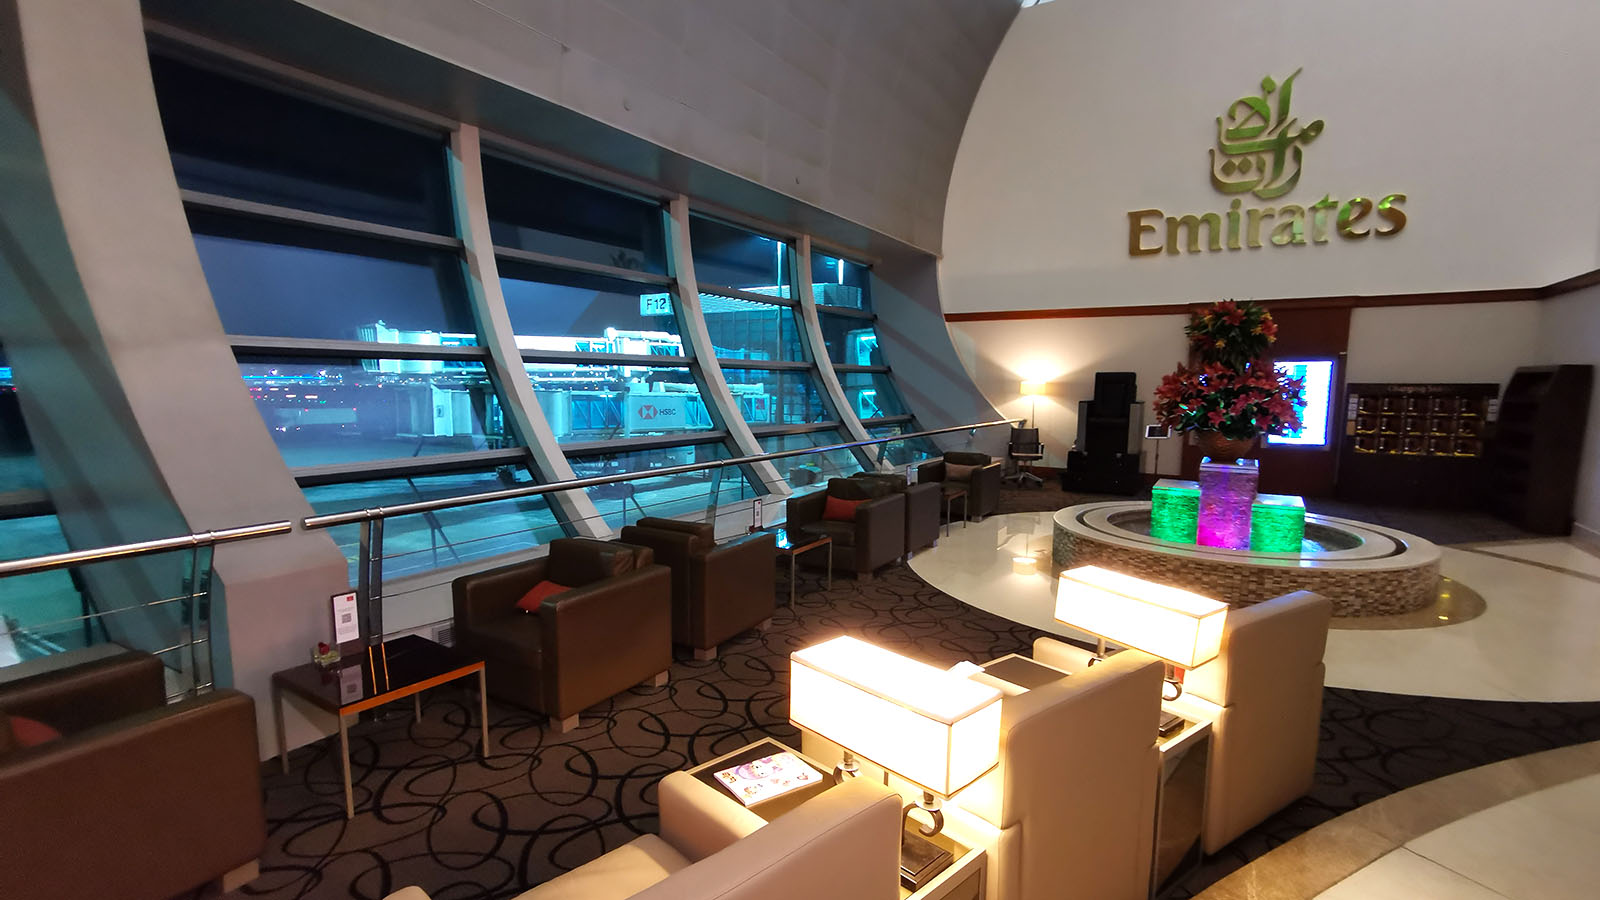 Seating in the Emirates First Class Lounge, Dubai Concourse C